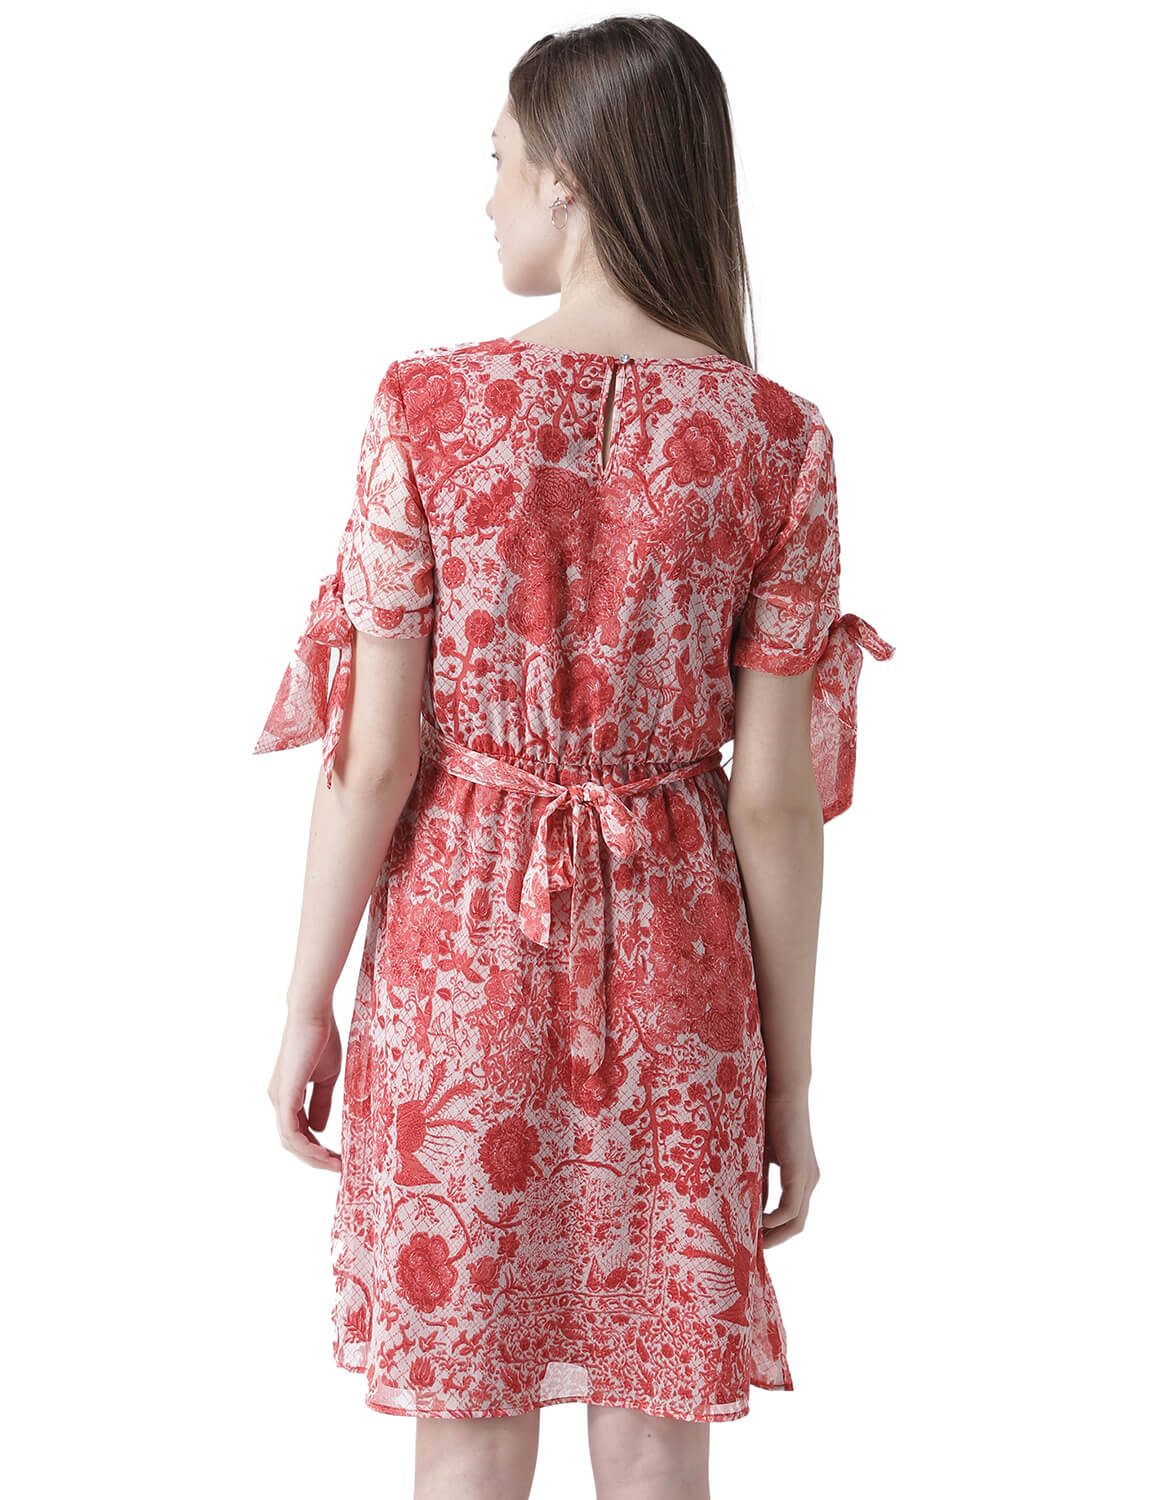 Women'S Printed Dress With Waist Tie Up